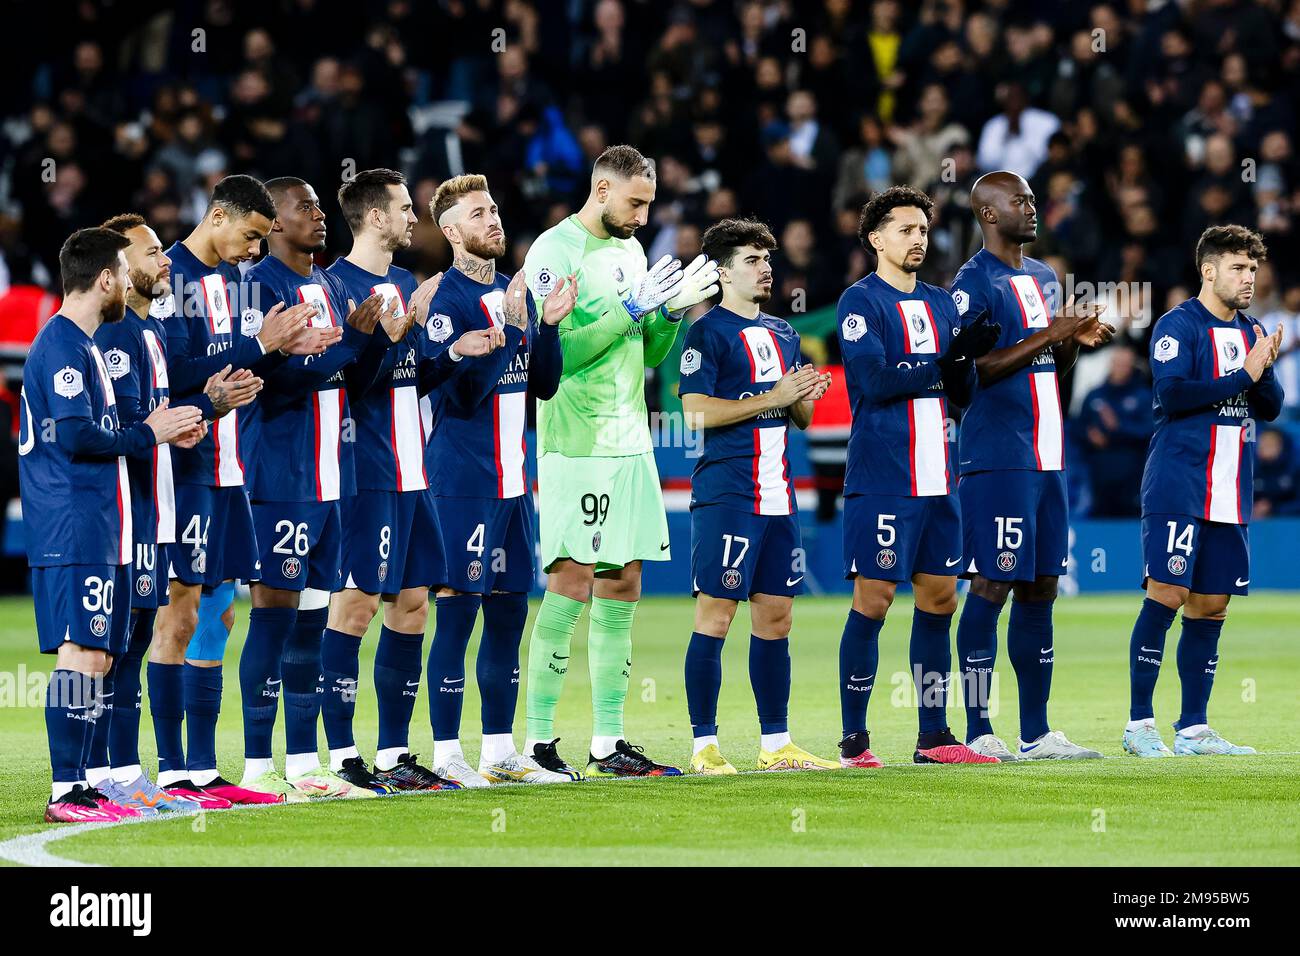 Paris, France - January 11: Paris Saint-Germain squad getting into the  field during the Ligue 1 match between Paris Saint-Germain and Angers SCO  at Parc des Princes on January 11, 2023 in